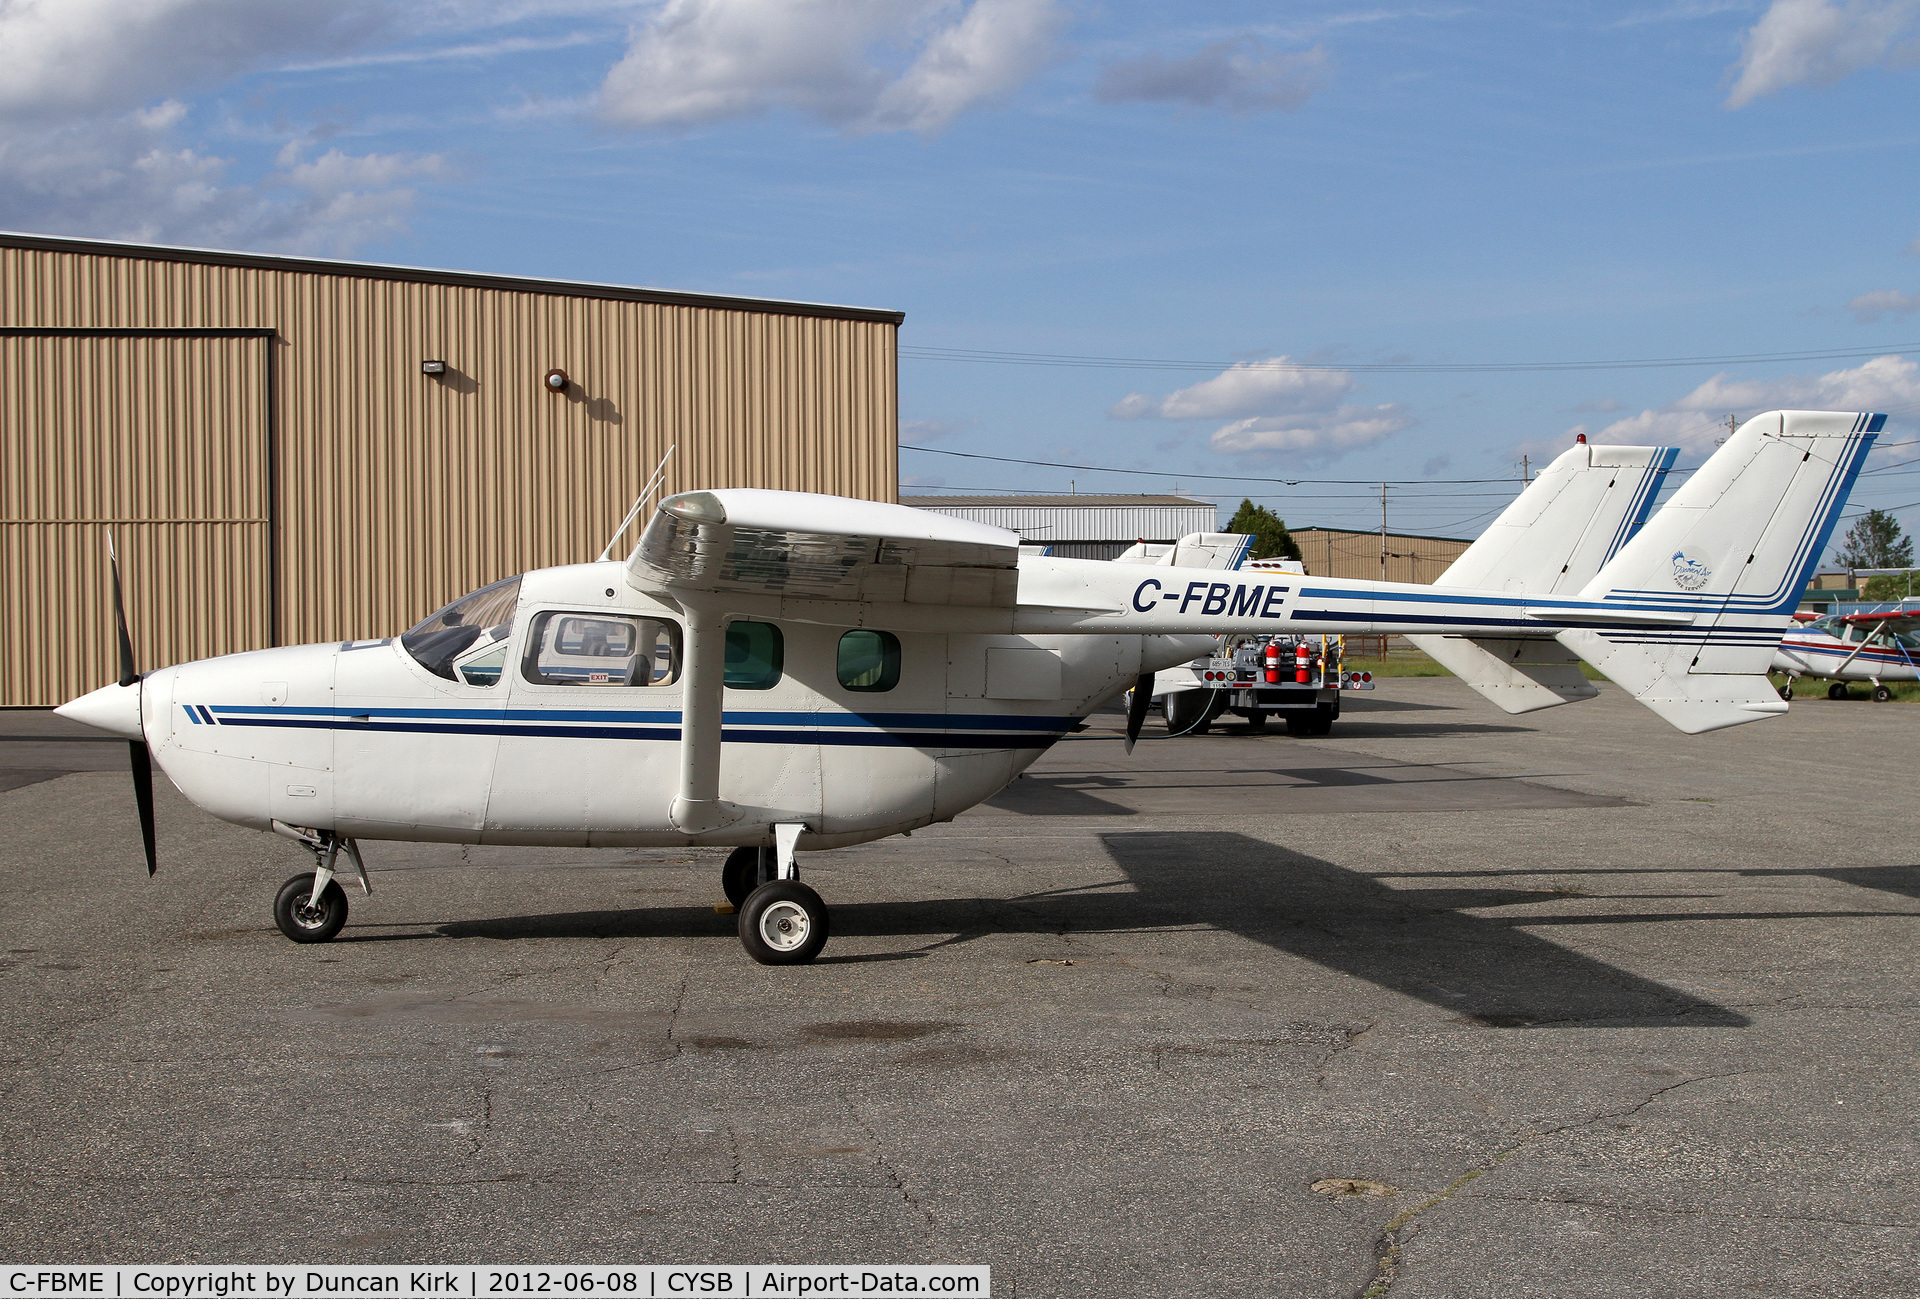 C-FBME, Cessna 337G Super Skymaster C/N 33701734, One of 14+ fire spotters in the fleet